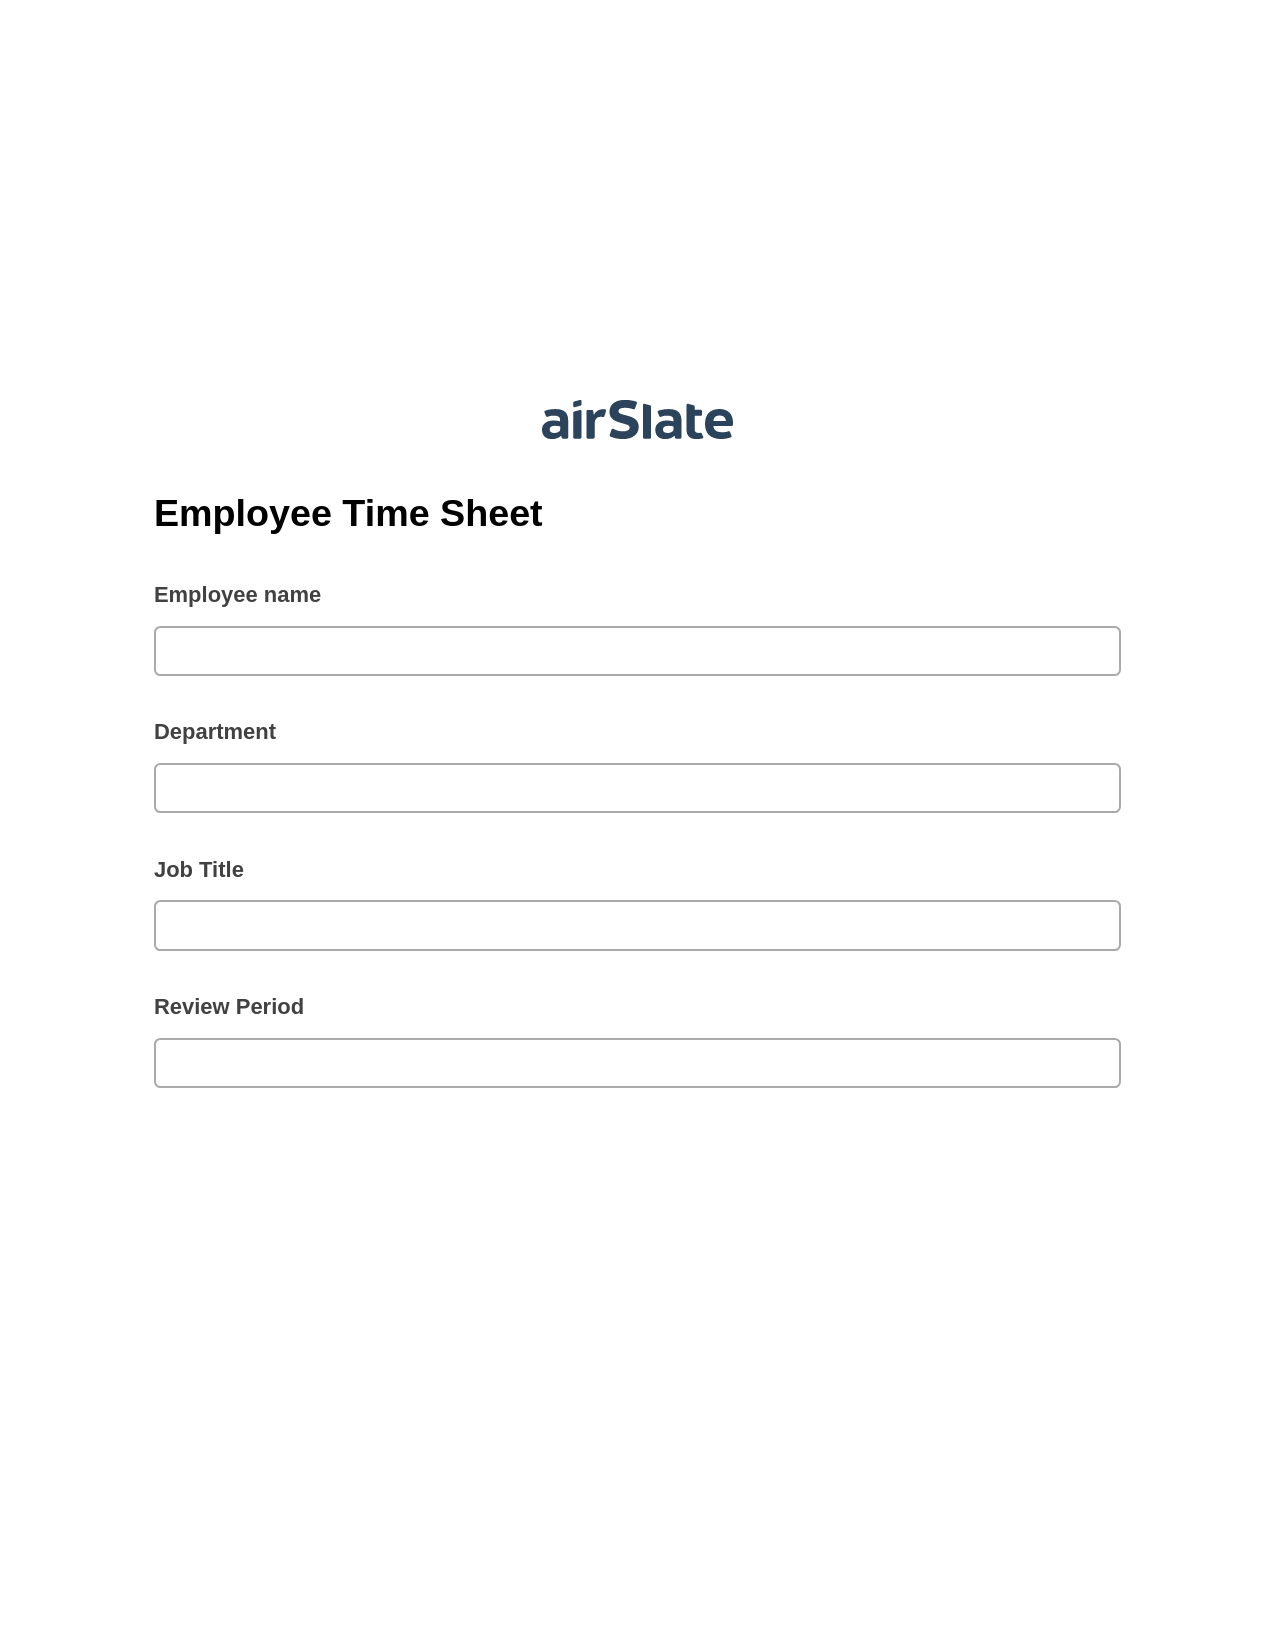 Multirole Employee Time Sheet Pre-fill from Excel Spreadsheet Bot, Create Salesforce Records Bot, Export to Smartsheet